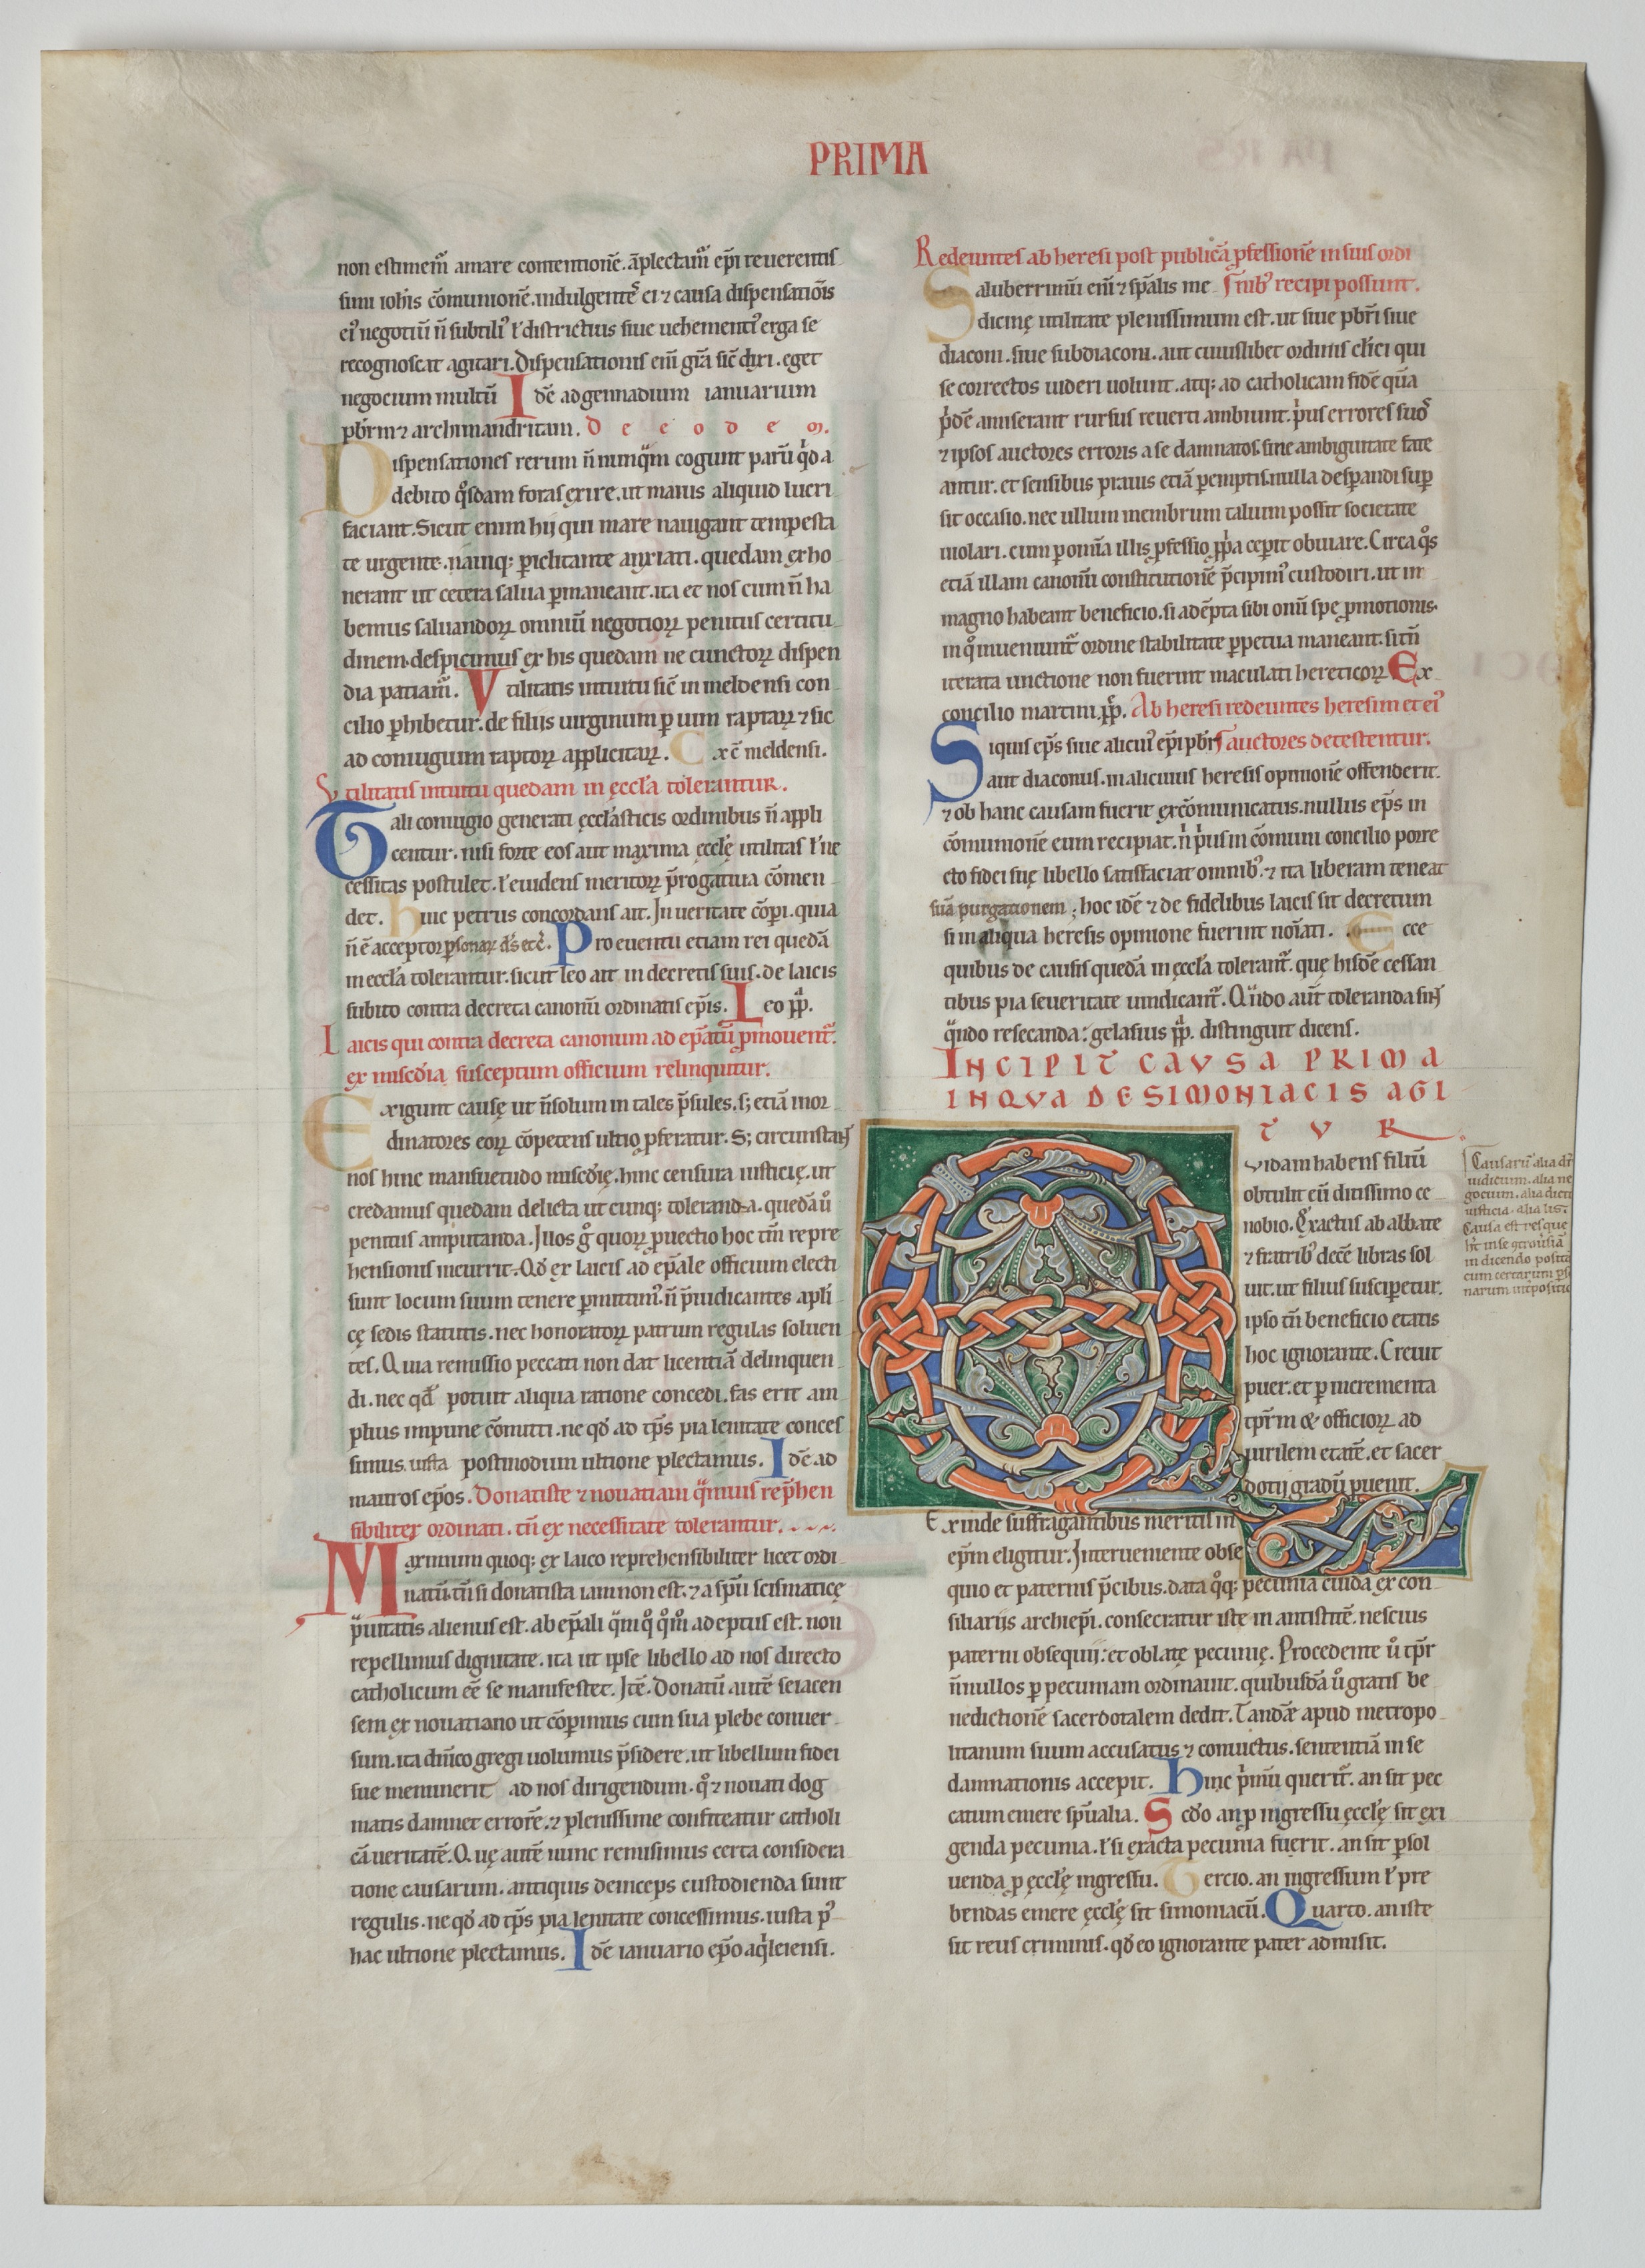 Single Leaf from a Decretum by Gratian: Decorated Initial Q[uidam habens filium obtulit] and Quadruple Arcade with Concordance of Greek and Latin Alphabets 